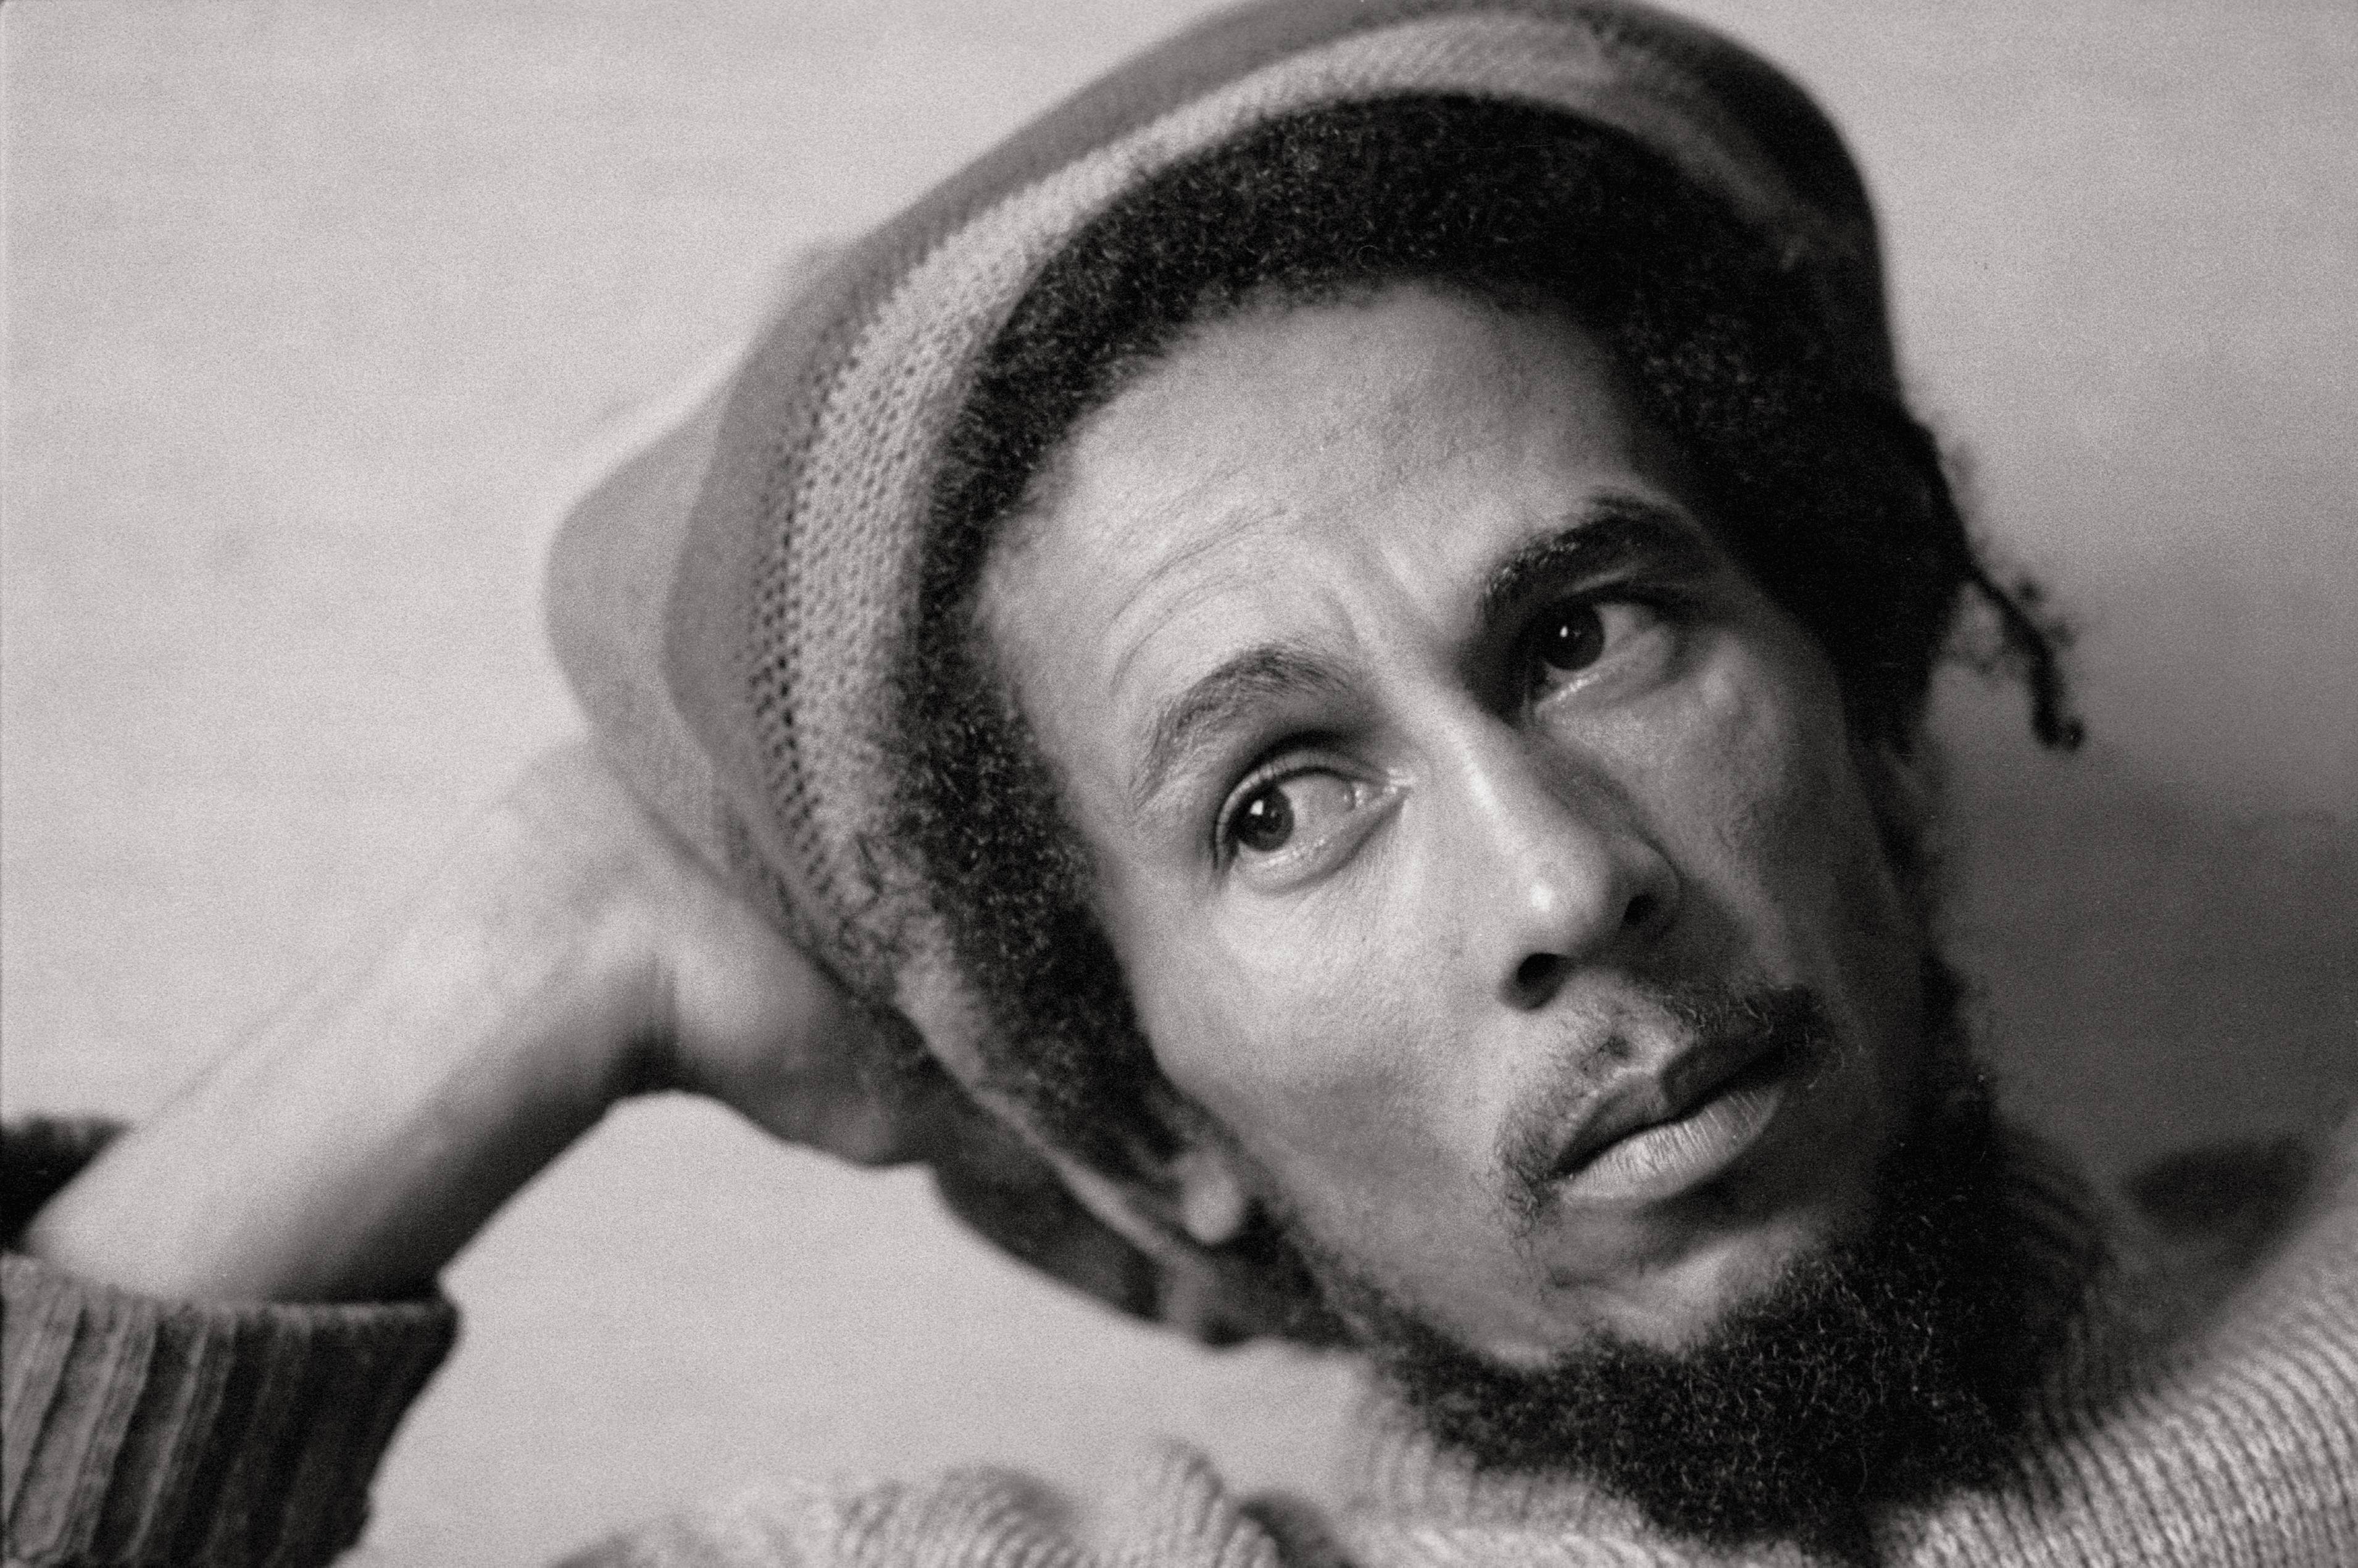 Bob Marley sits wearing a cap on his head for a potrait photo on January 1, 1980 | Photo: Getty Images